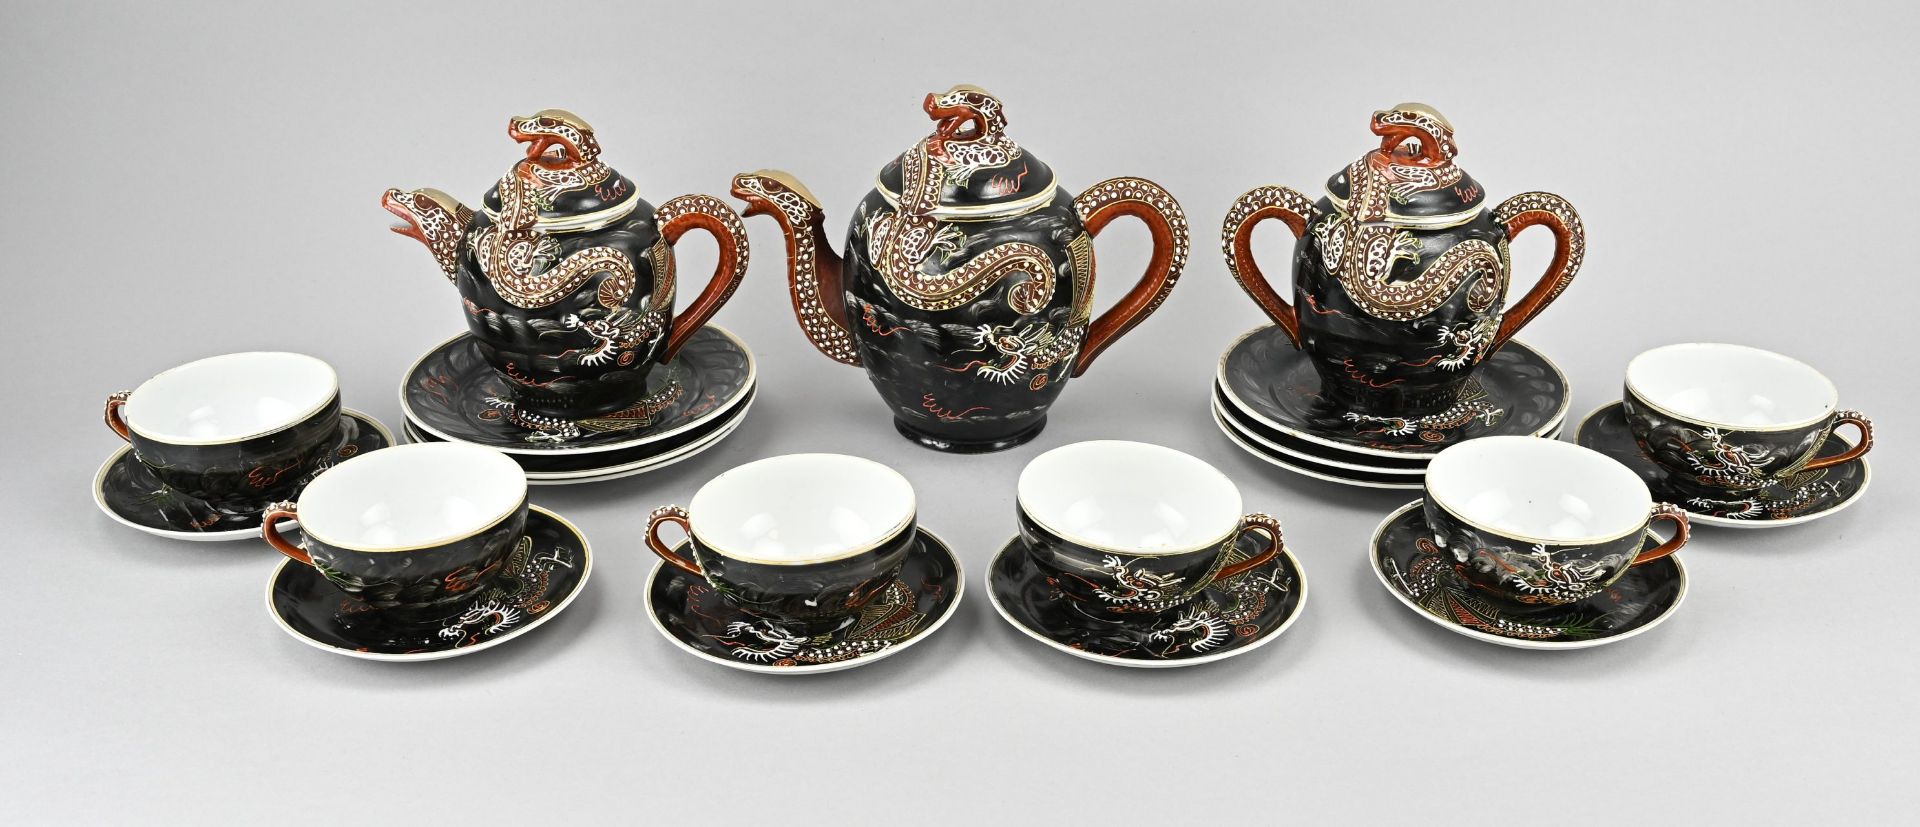 Antique Chinese tableware